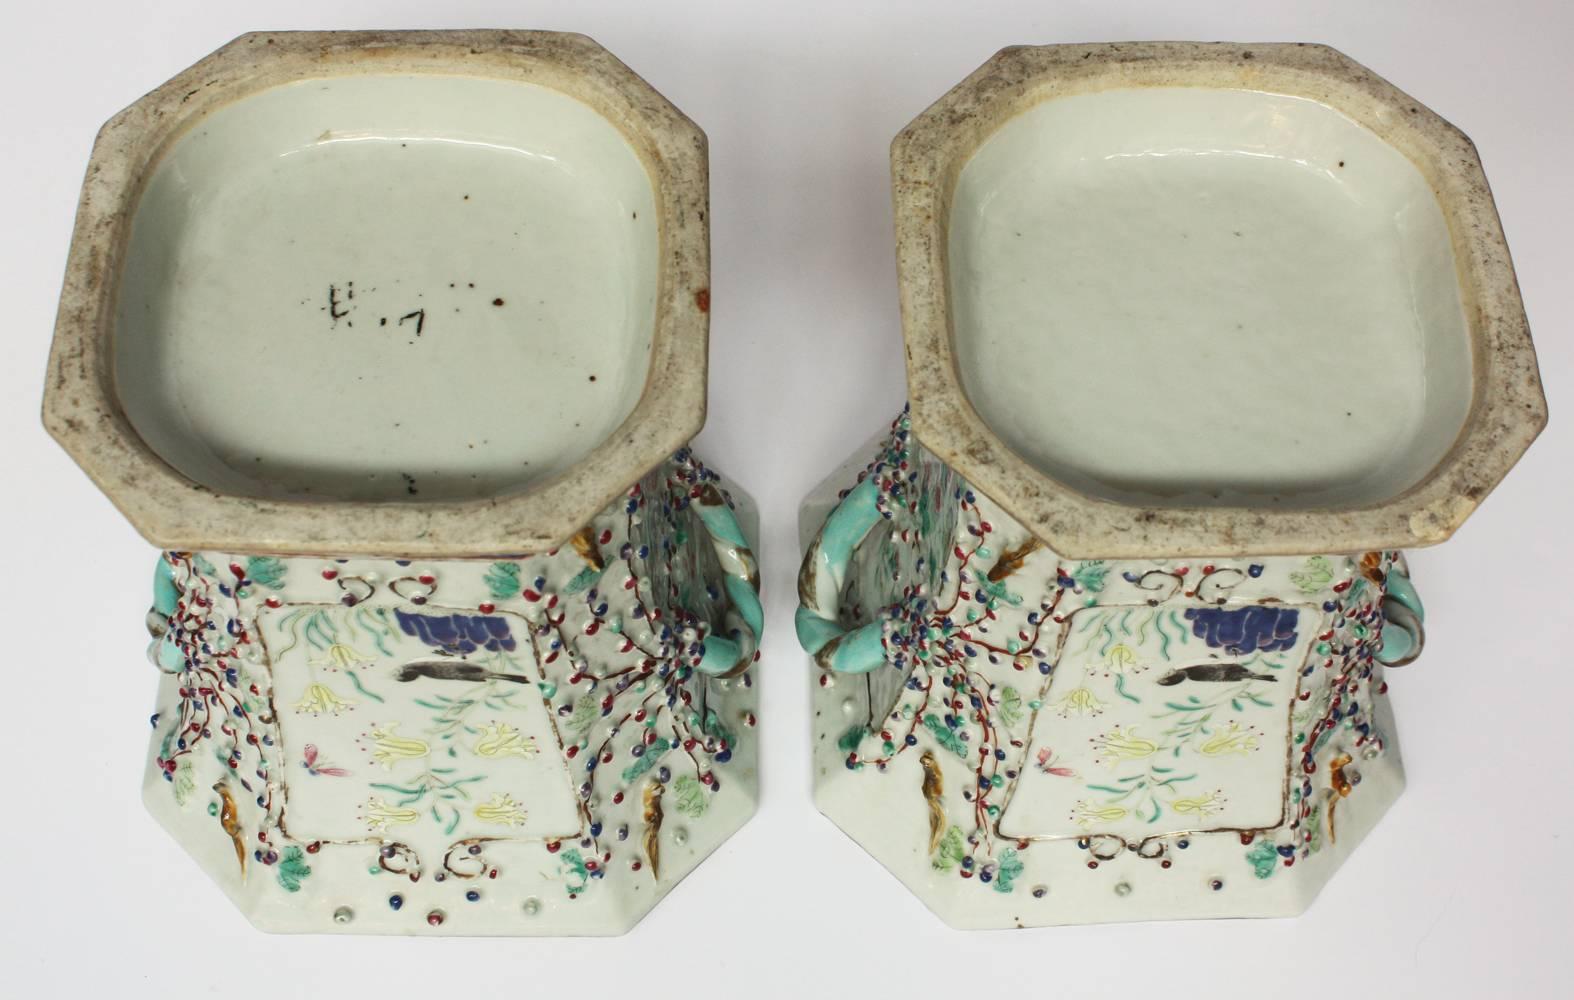 Porcelain Pair of Chinese Export Bough Pots